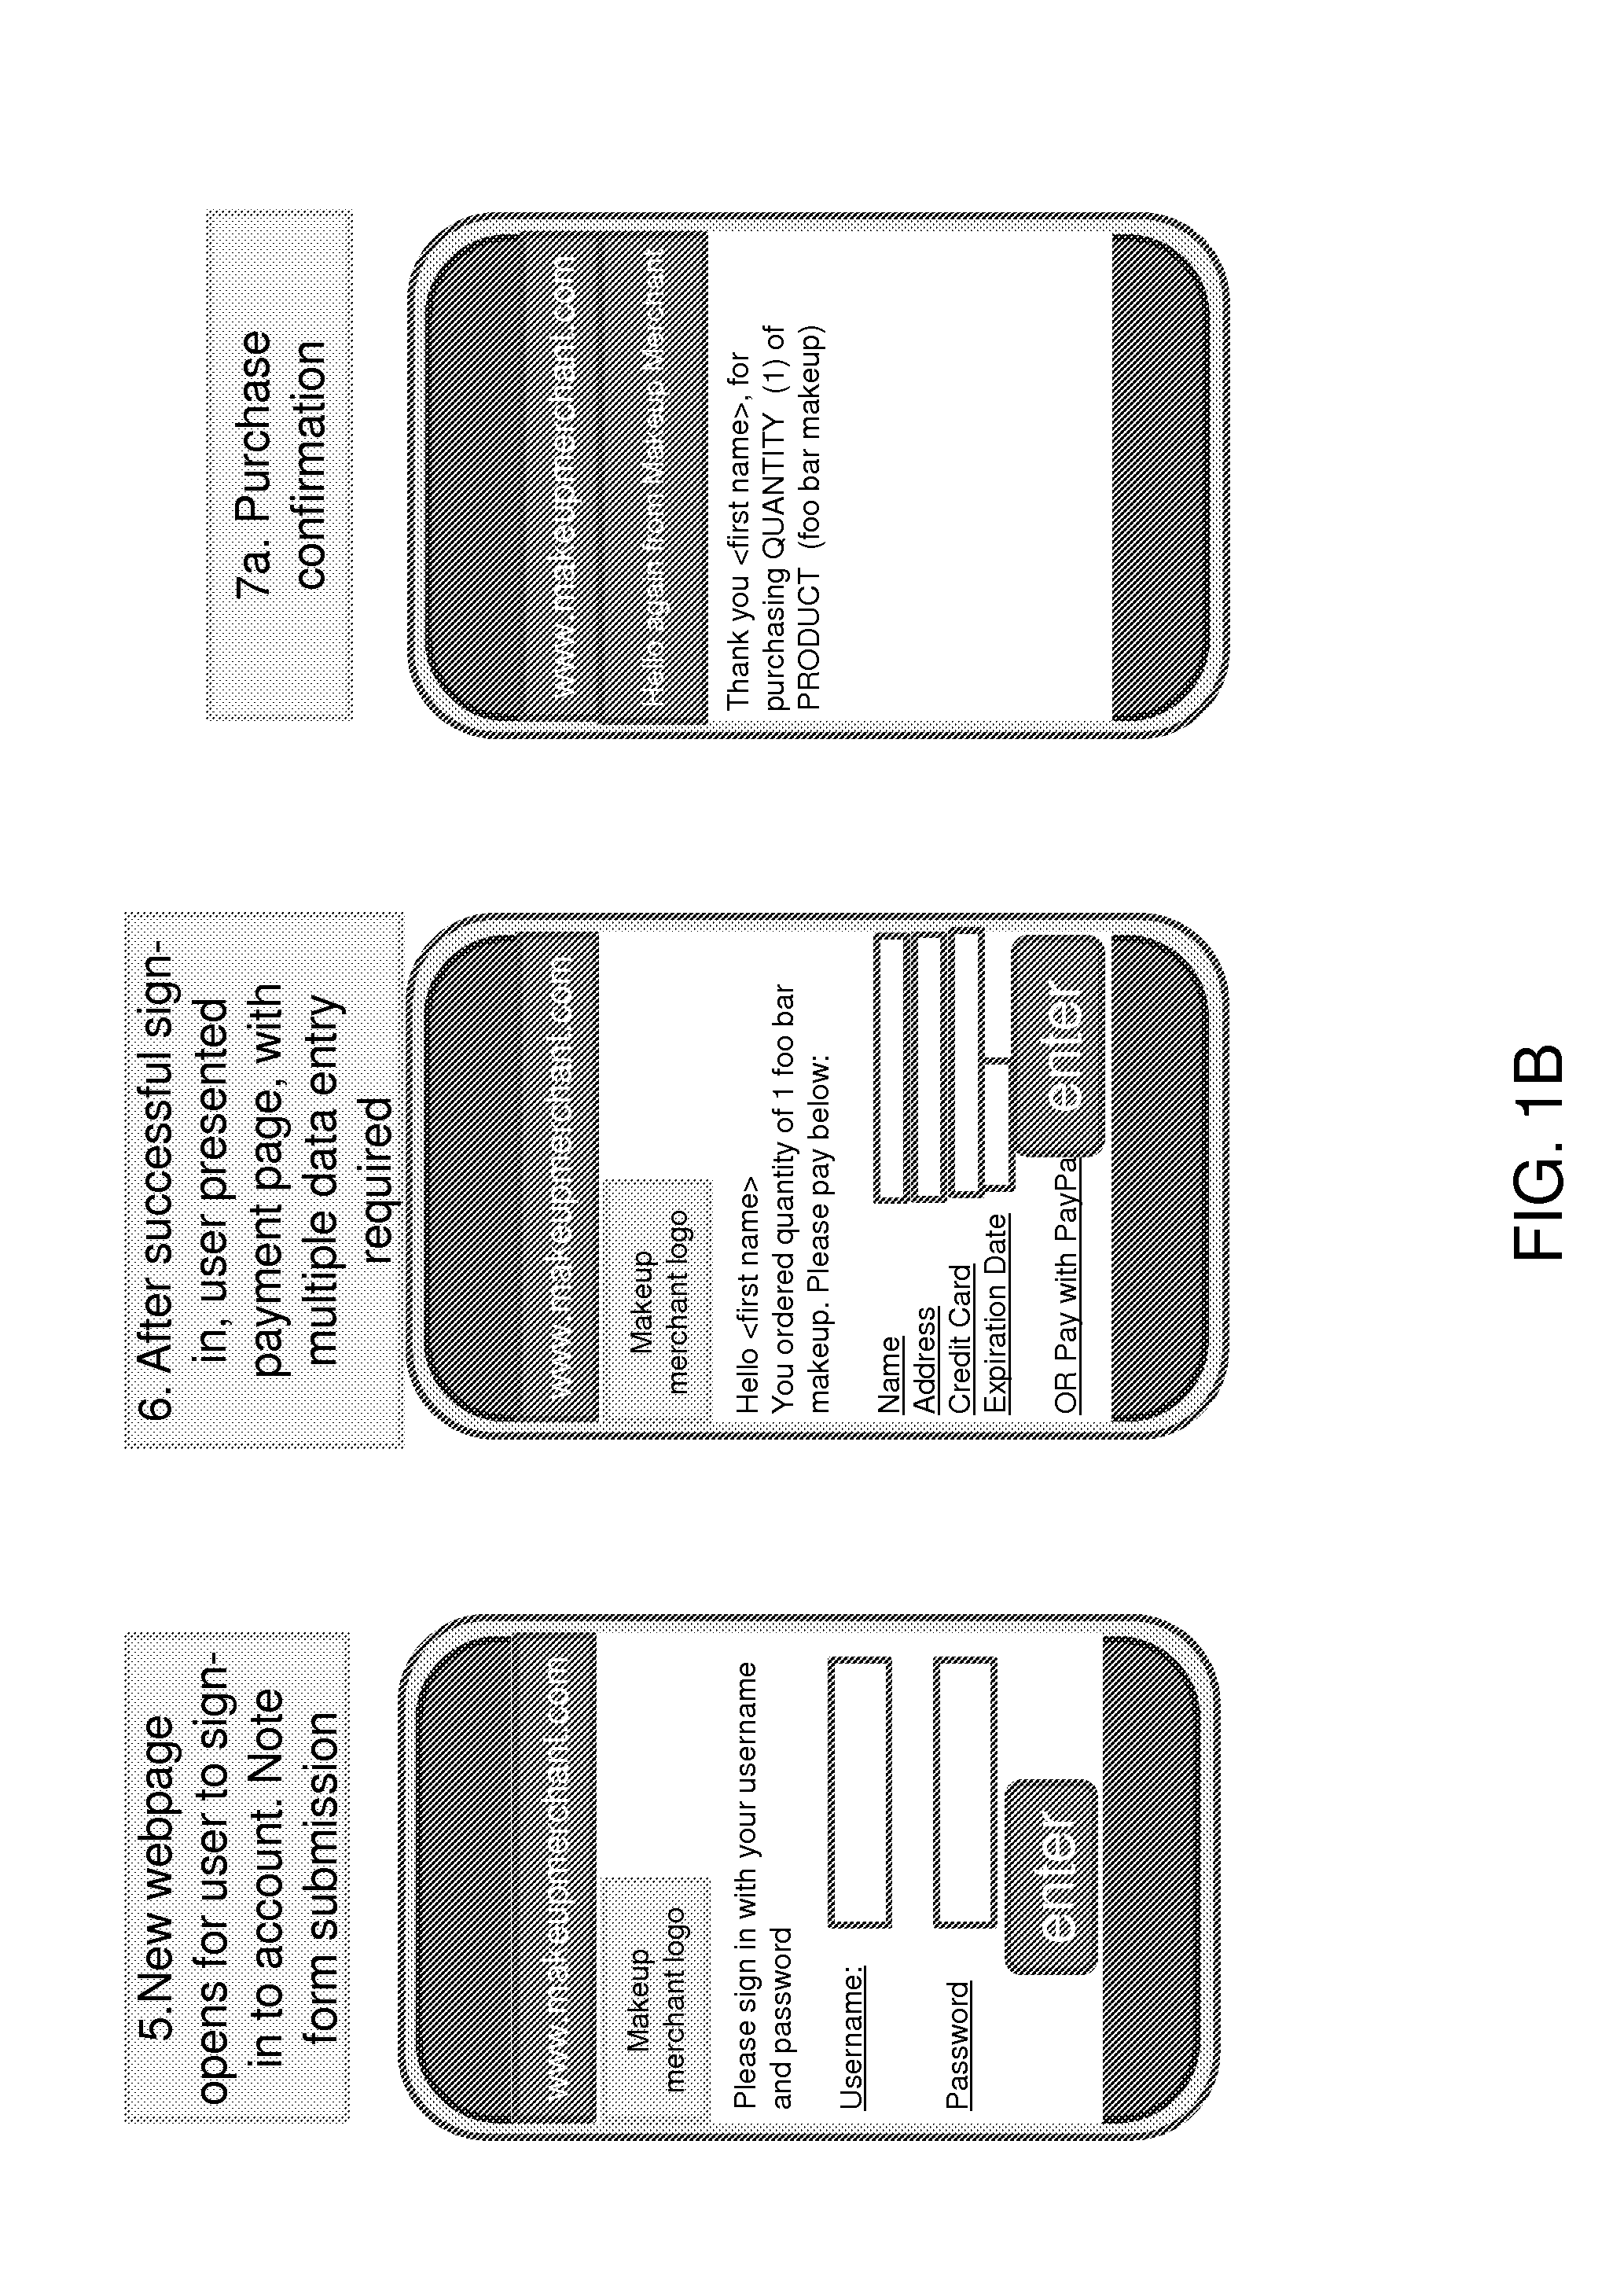 System, method, and computer program product for electronic purchasing without alpha numeric data entry